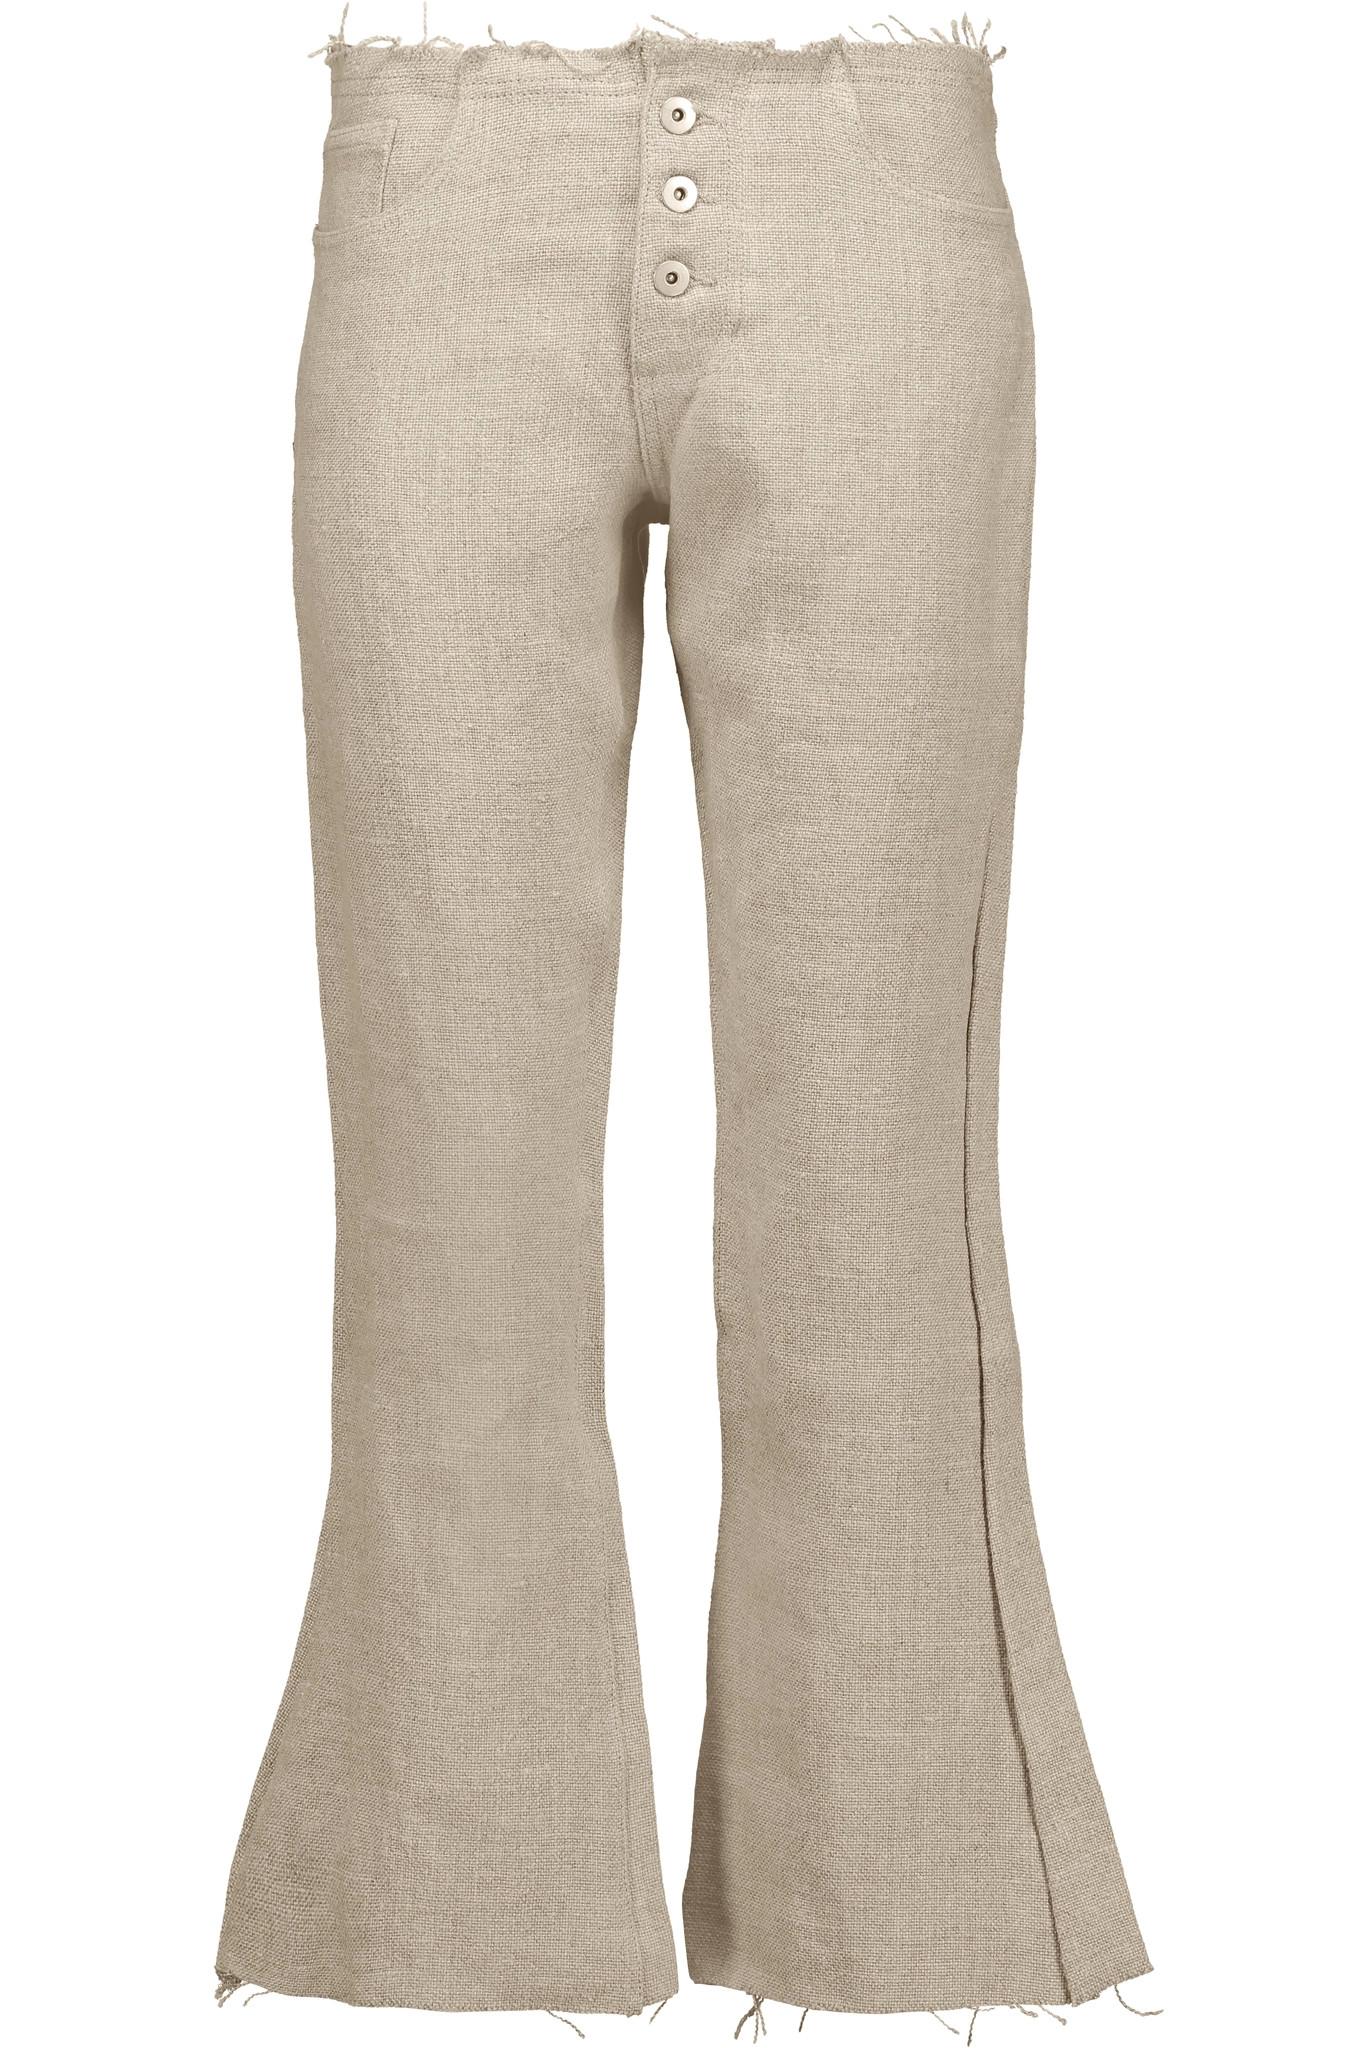 Marques'almeida Frayed Linen Bootcut Pants in Natural | Lyst